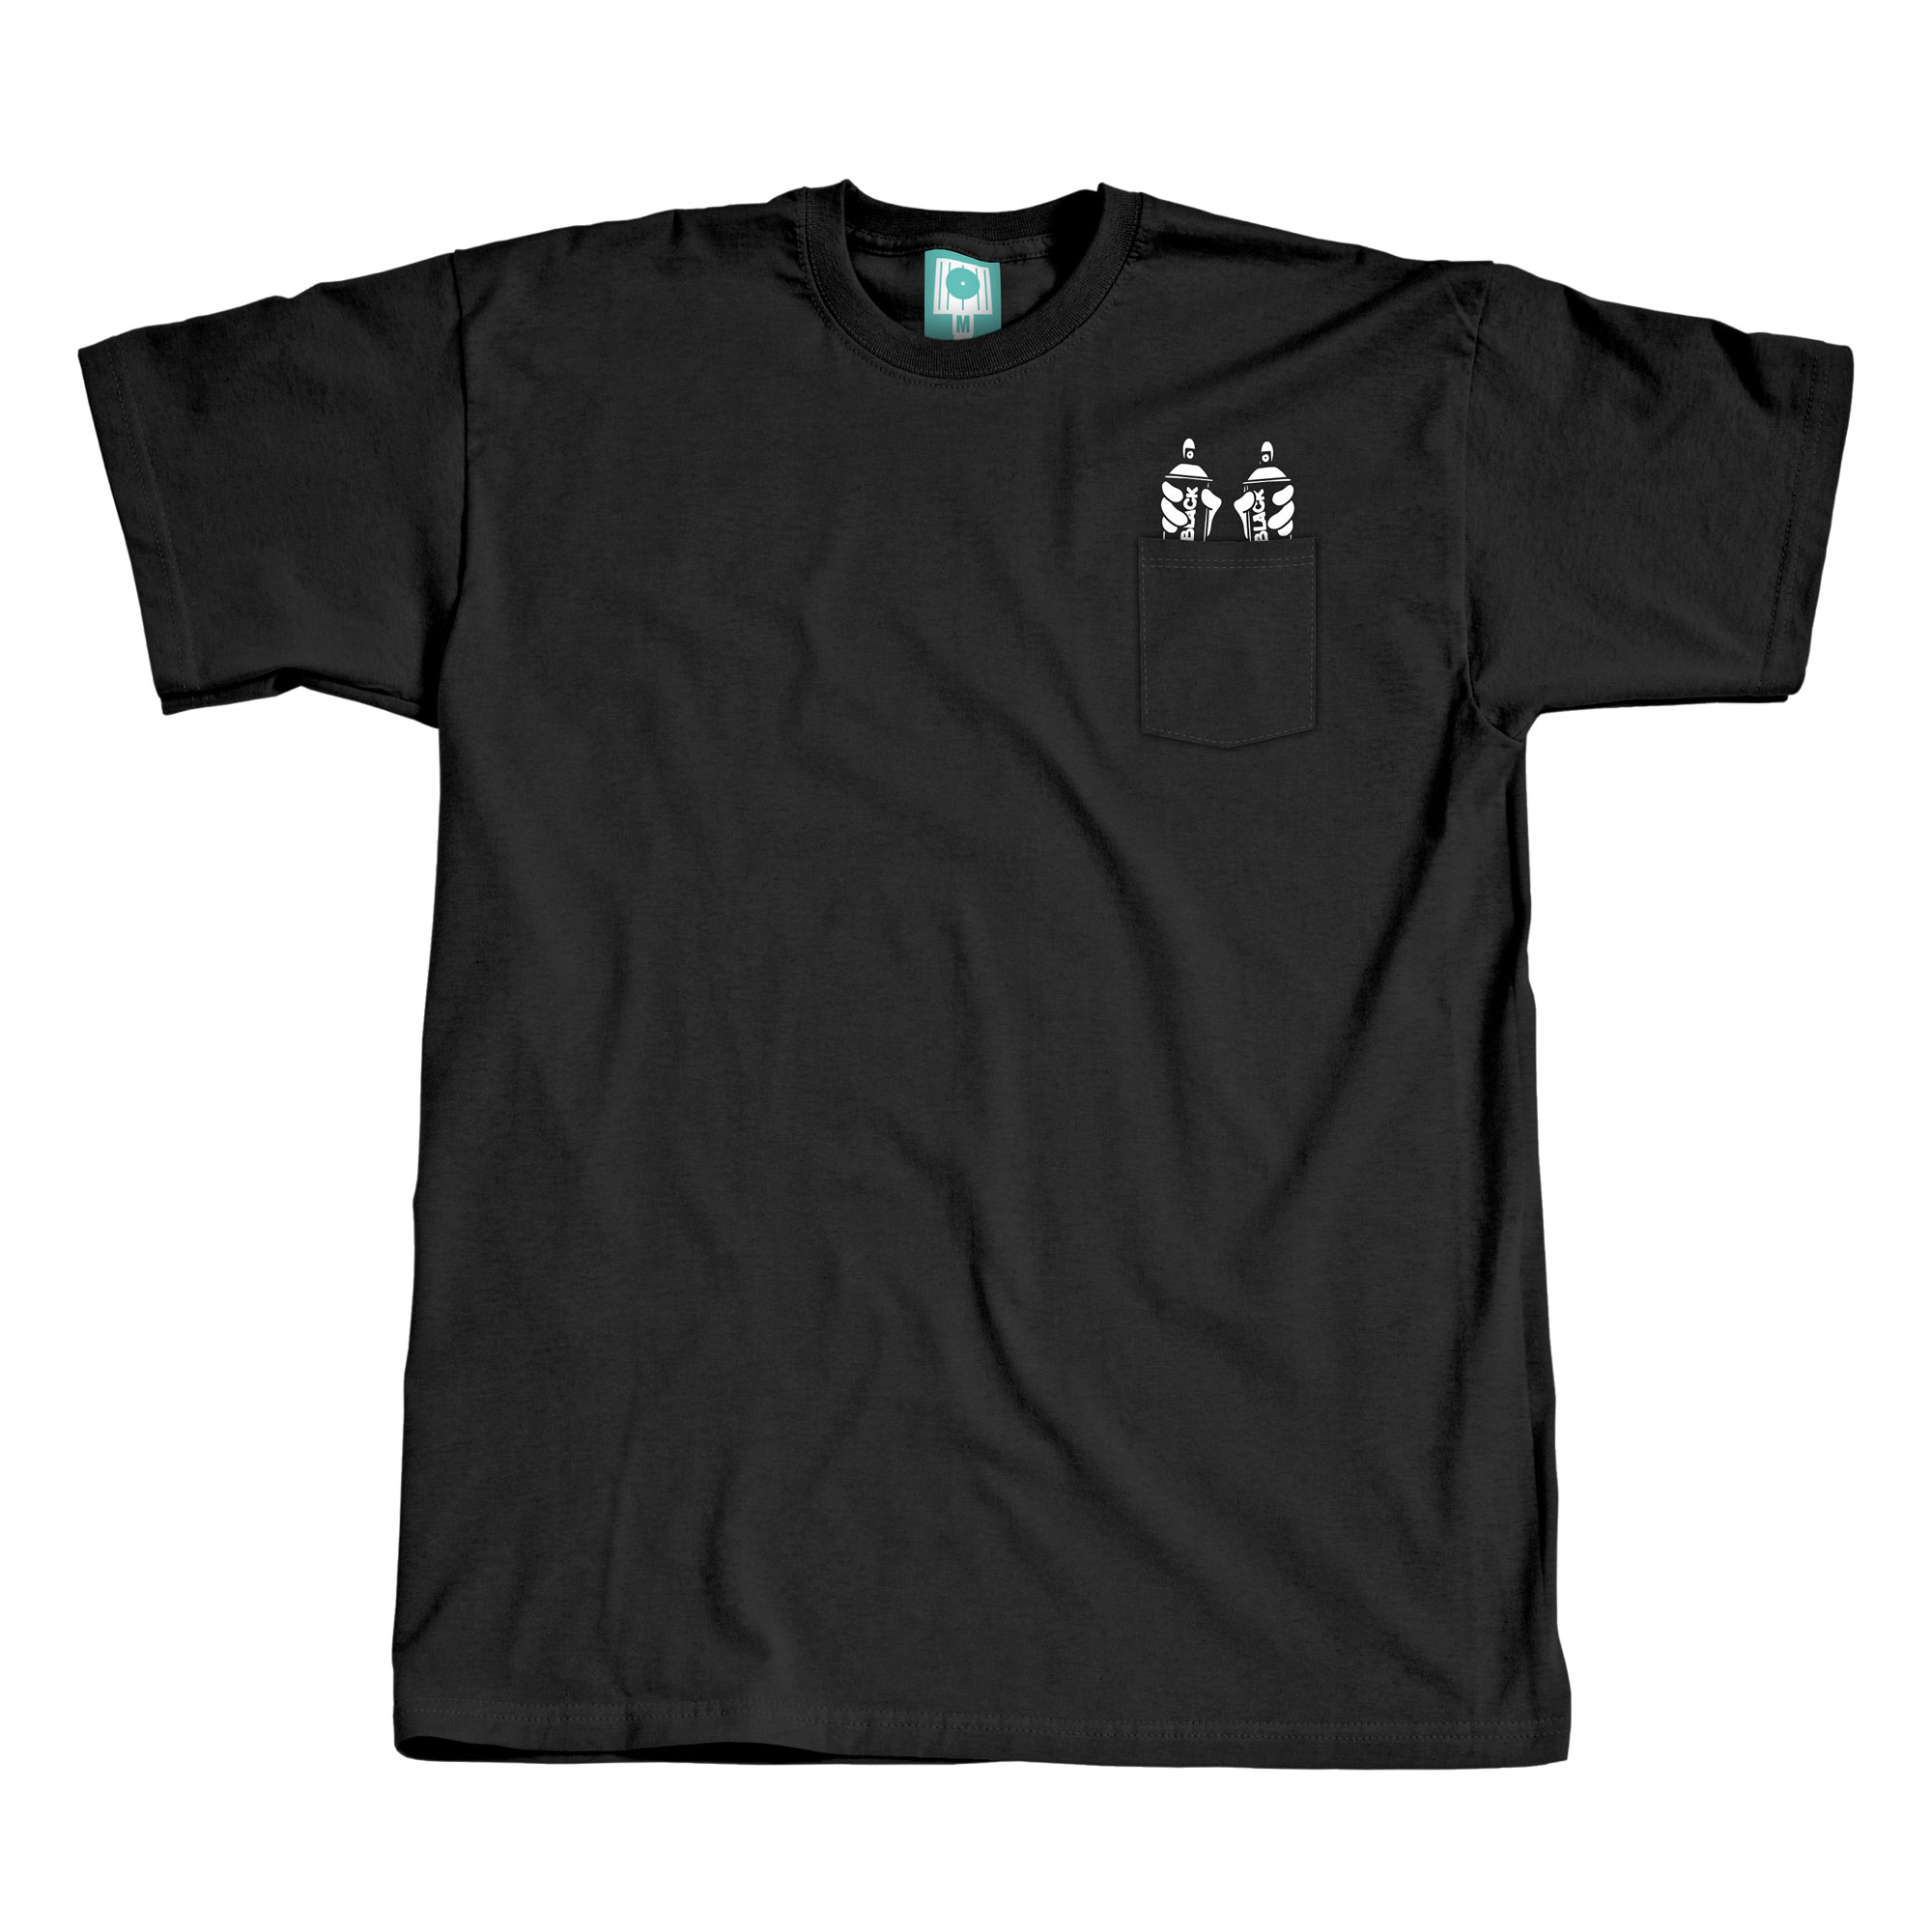 Montana Cans Pocket T-Shirt BLACK CAN by SUPERSPRAY